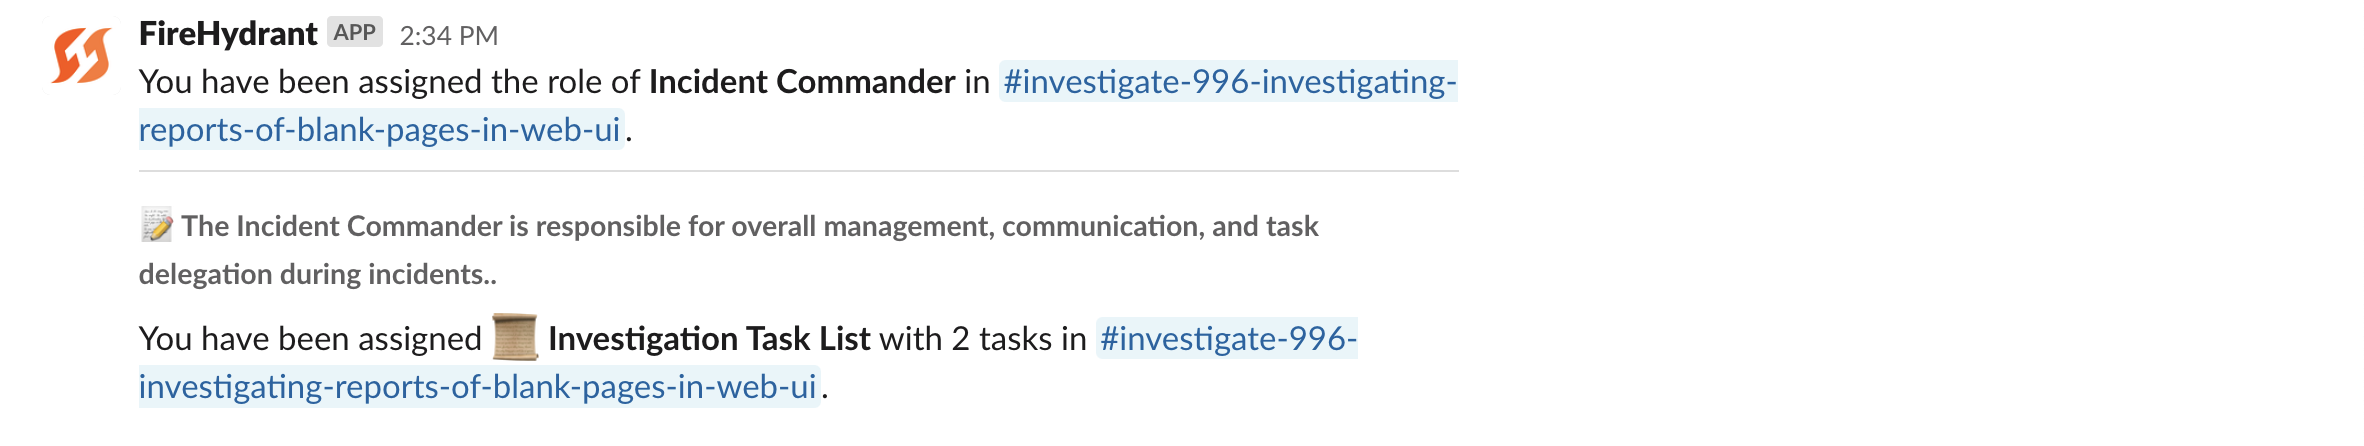 Notification received in Slack when assigned to roles and tasks